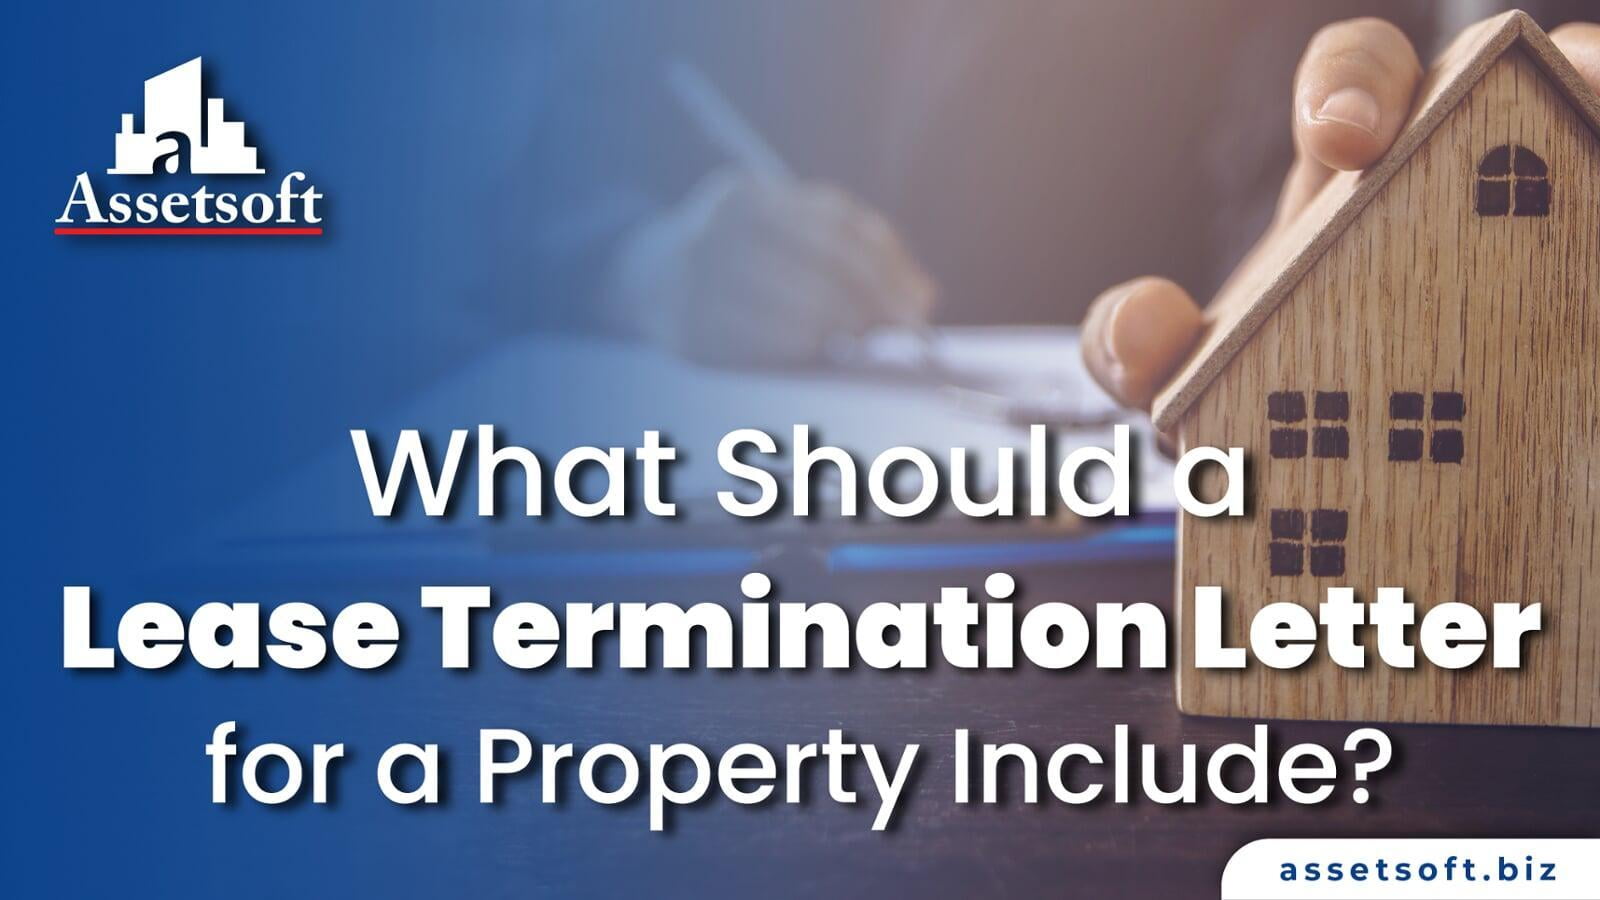 What Should a Commercial Lease Termination Letter Include? 